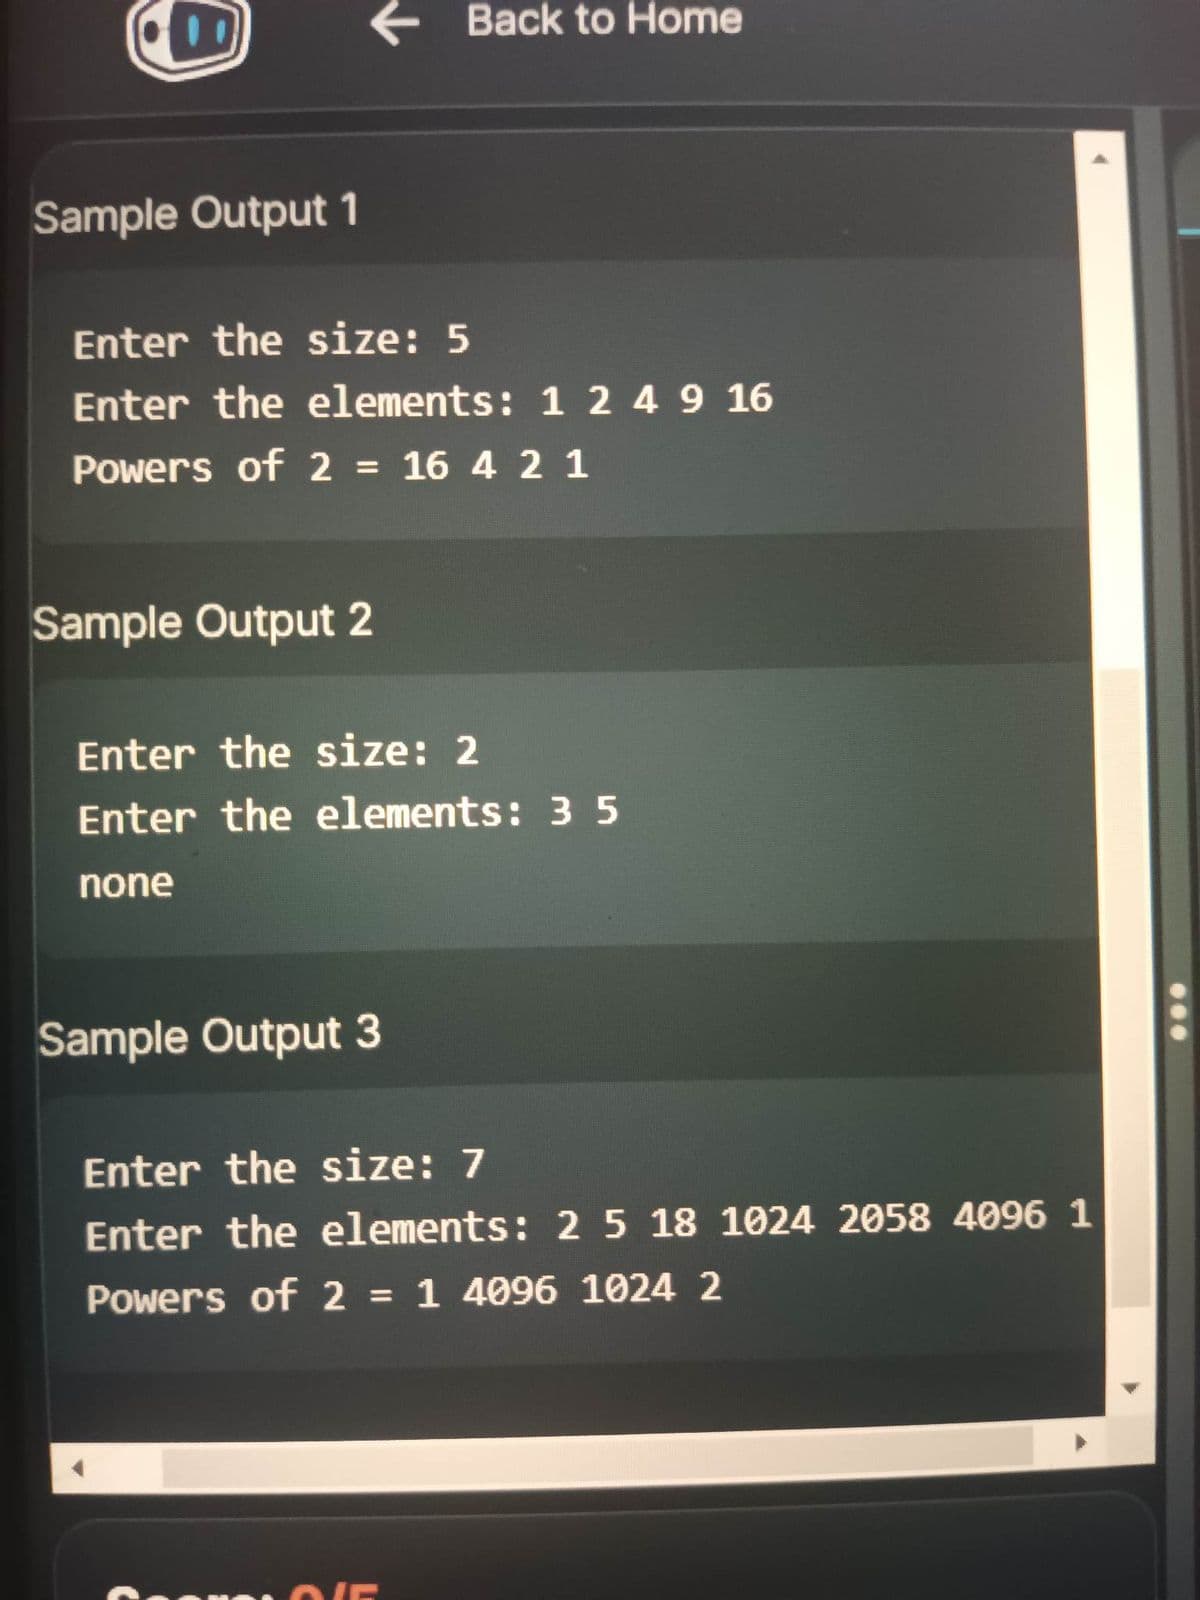 Sample Output 1
← Back to Home
Enter the size: 5
Enter the elements: 1 2 4 9 16
Powers of 2 = 16 4 2 1
Sample Output 2
Enter the size: 2
Enter the elements: 35
none
Sample Output 3
Enter the size: 7
Enter the elements: 2 5 18 1024 2058 4096 1
Powers of 2 = 1 4096 1024 2
ONE